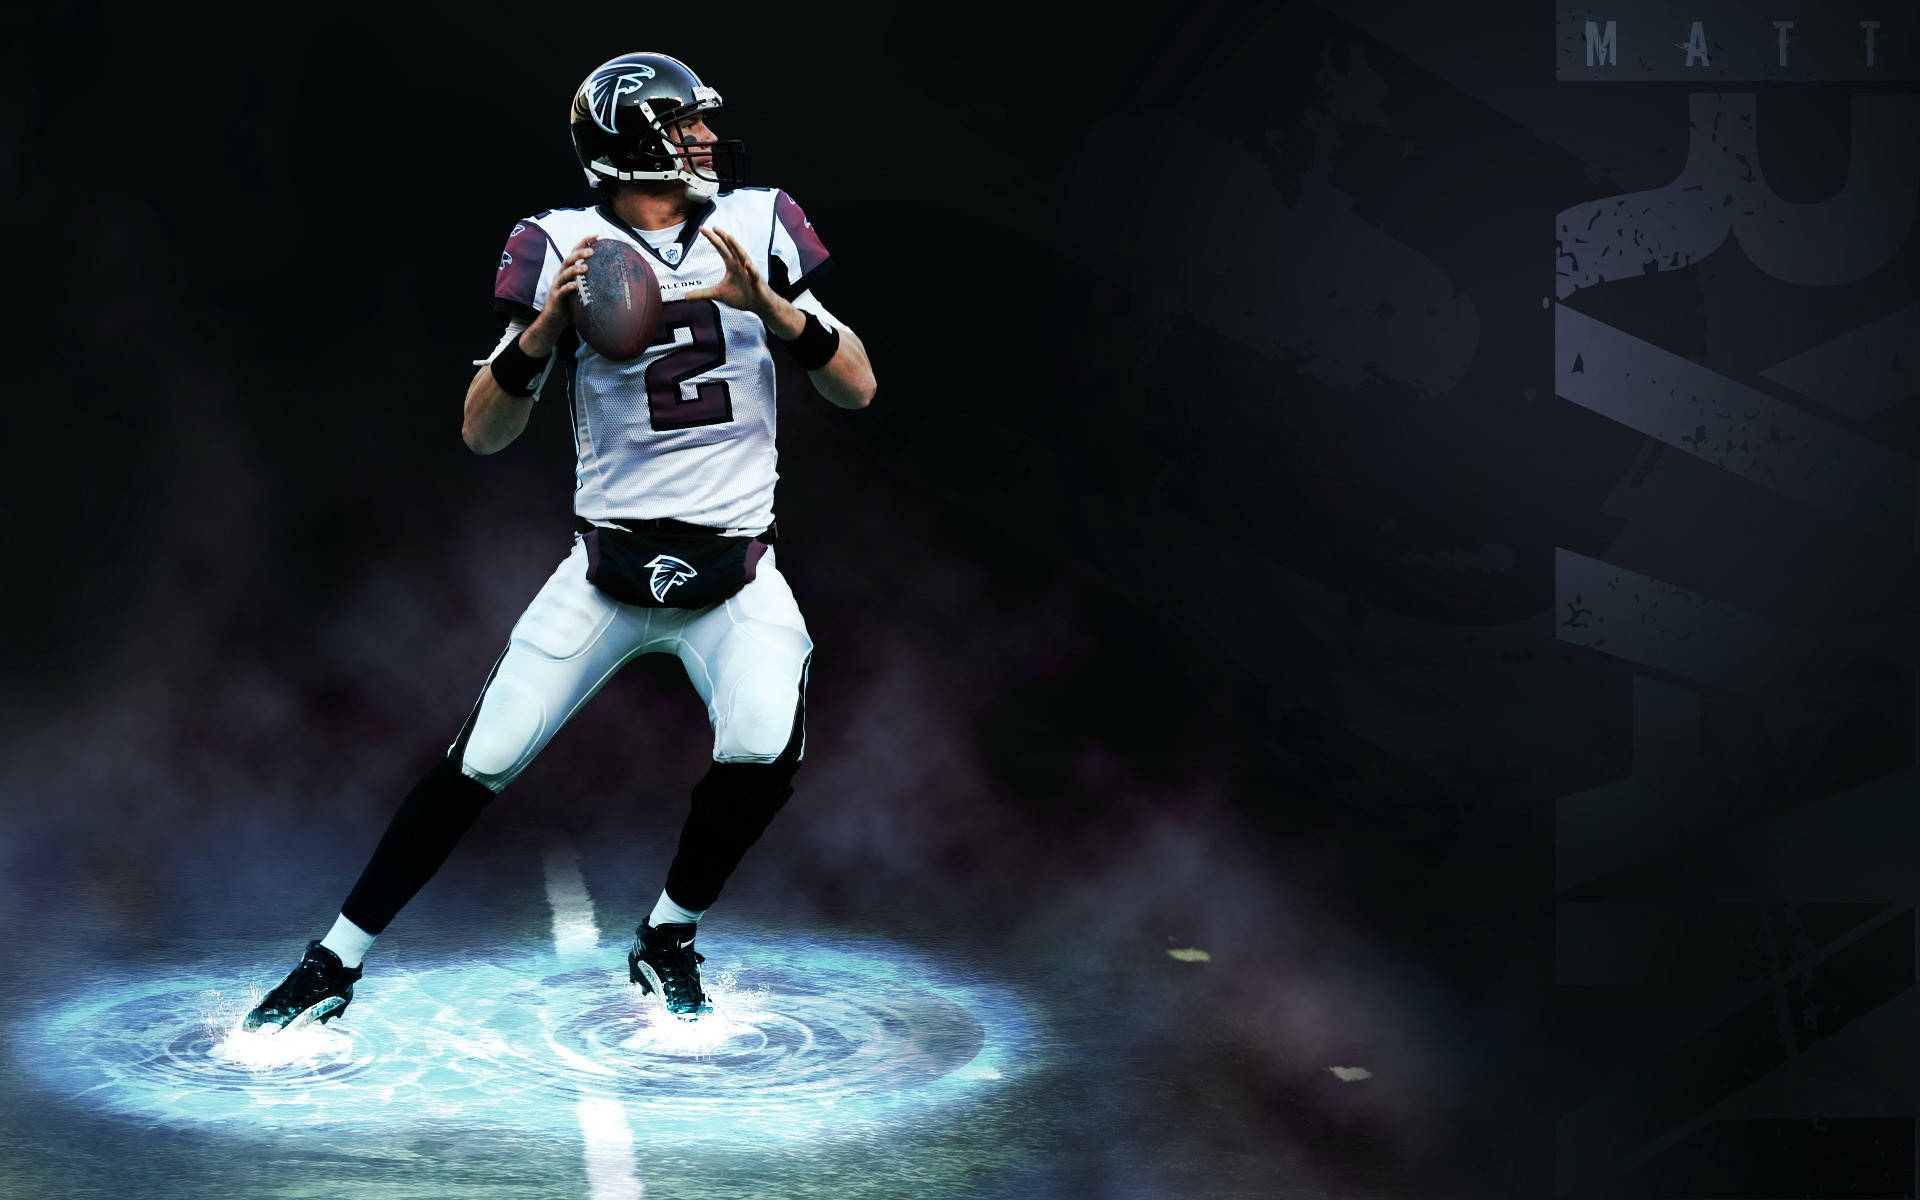 Nfl Football Player In Action Background